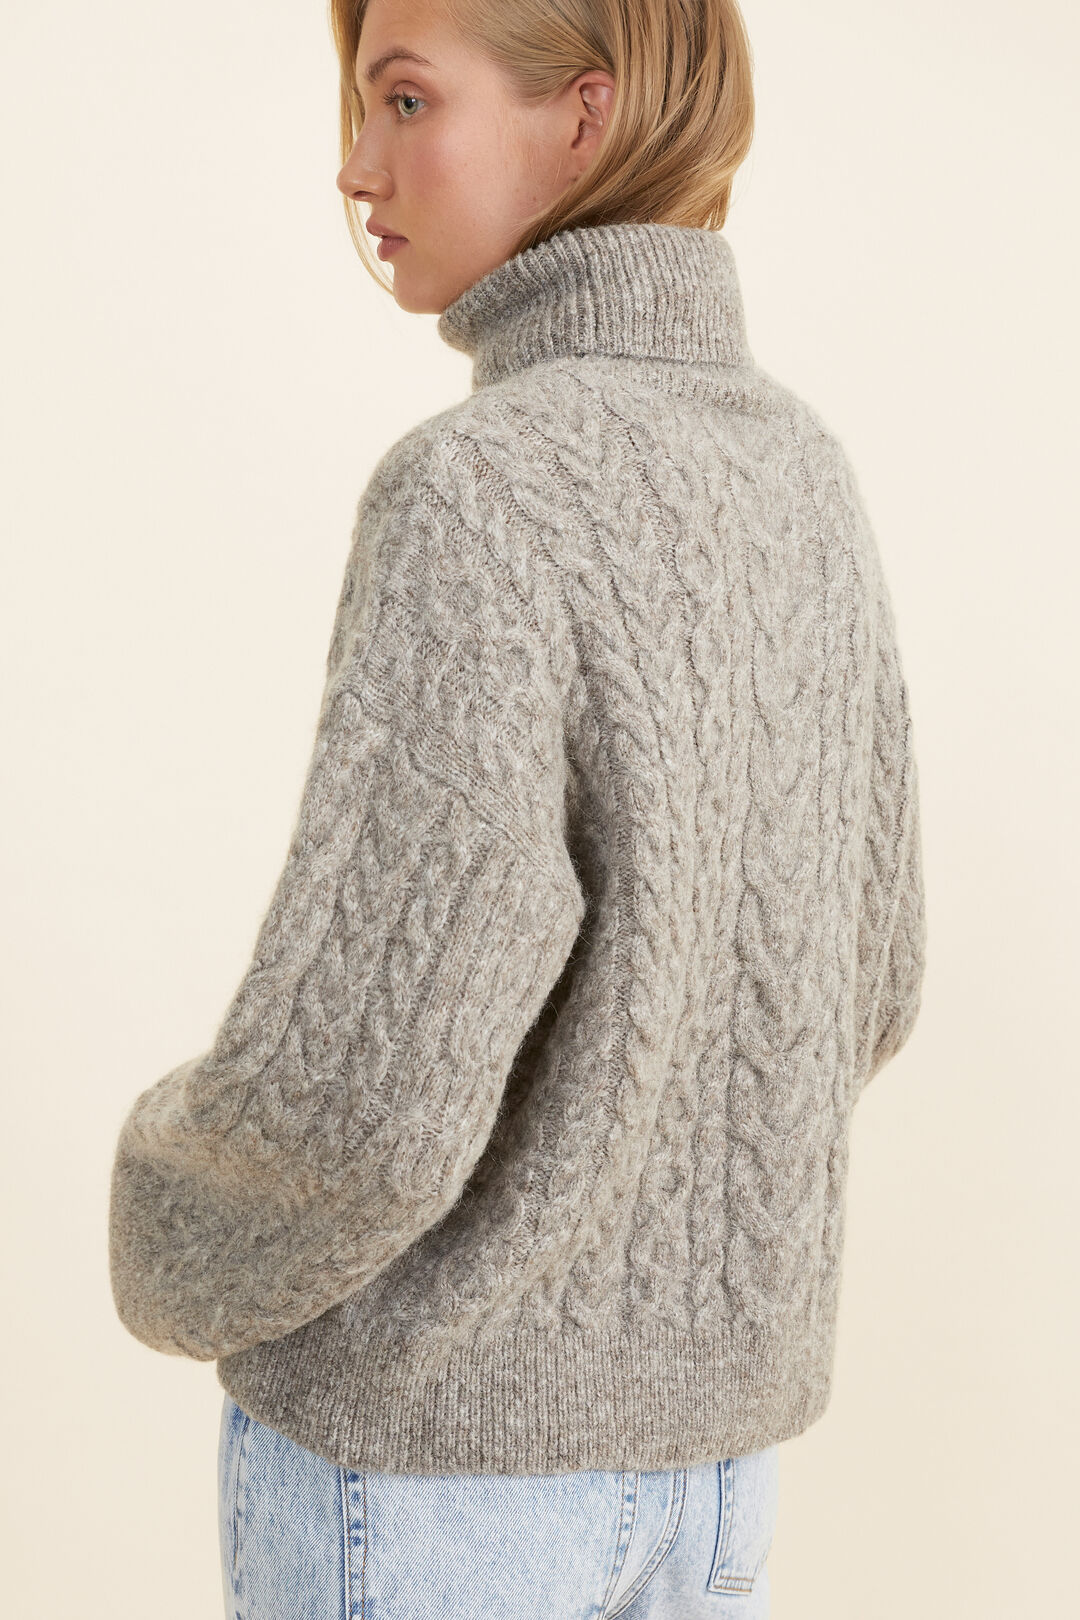 Chunky Roll Neck Sweater   Pewter Marle  hi-res